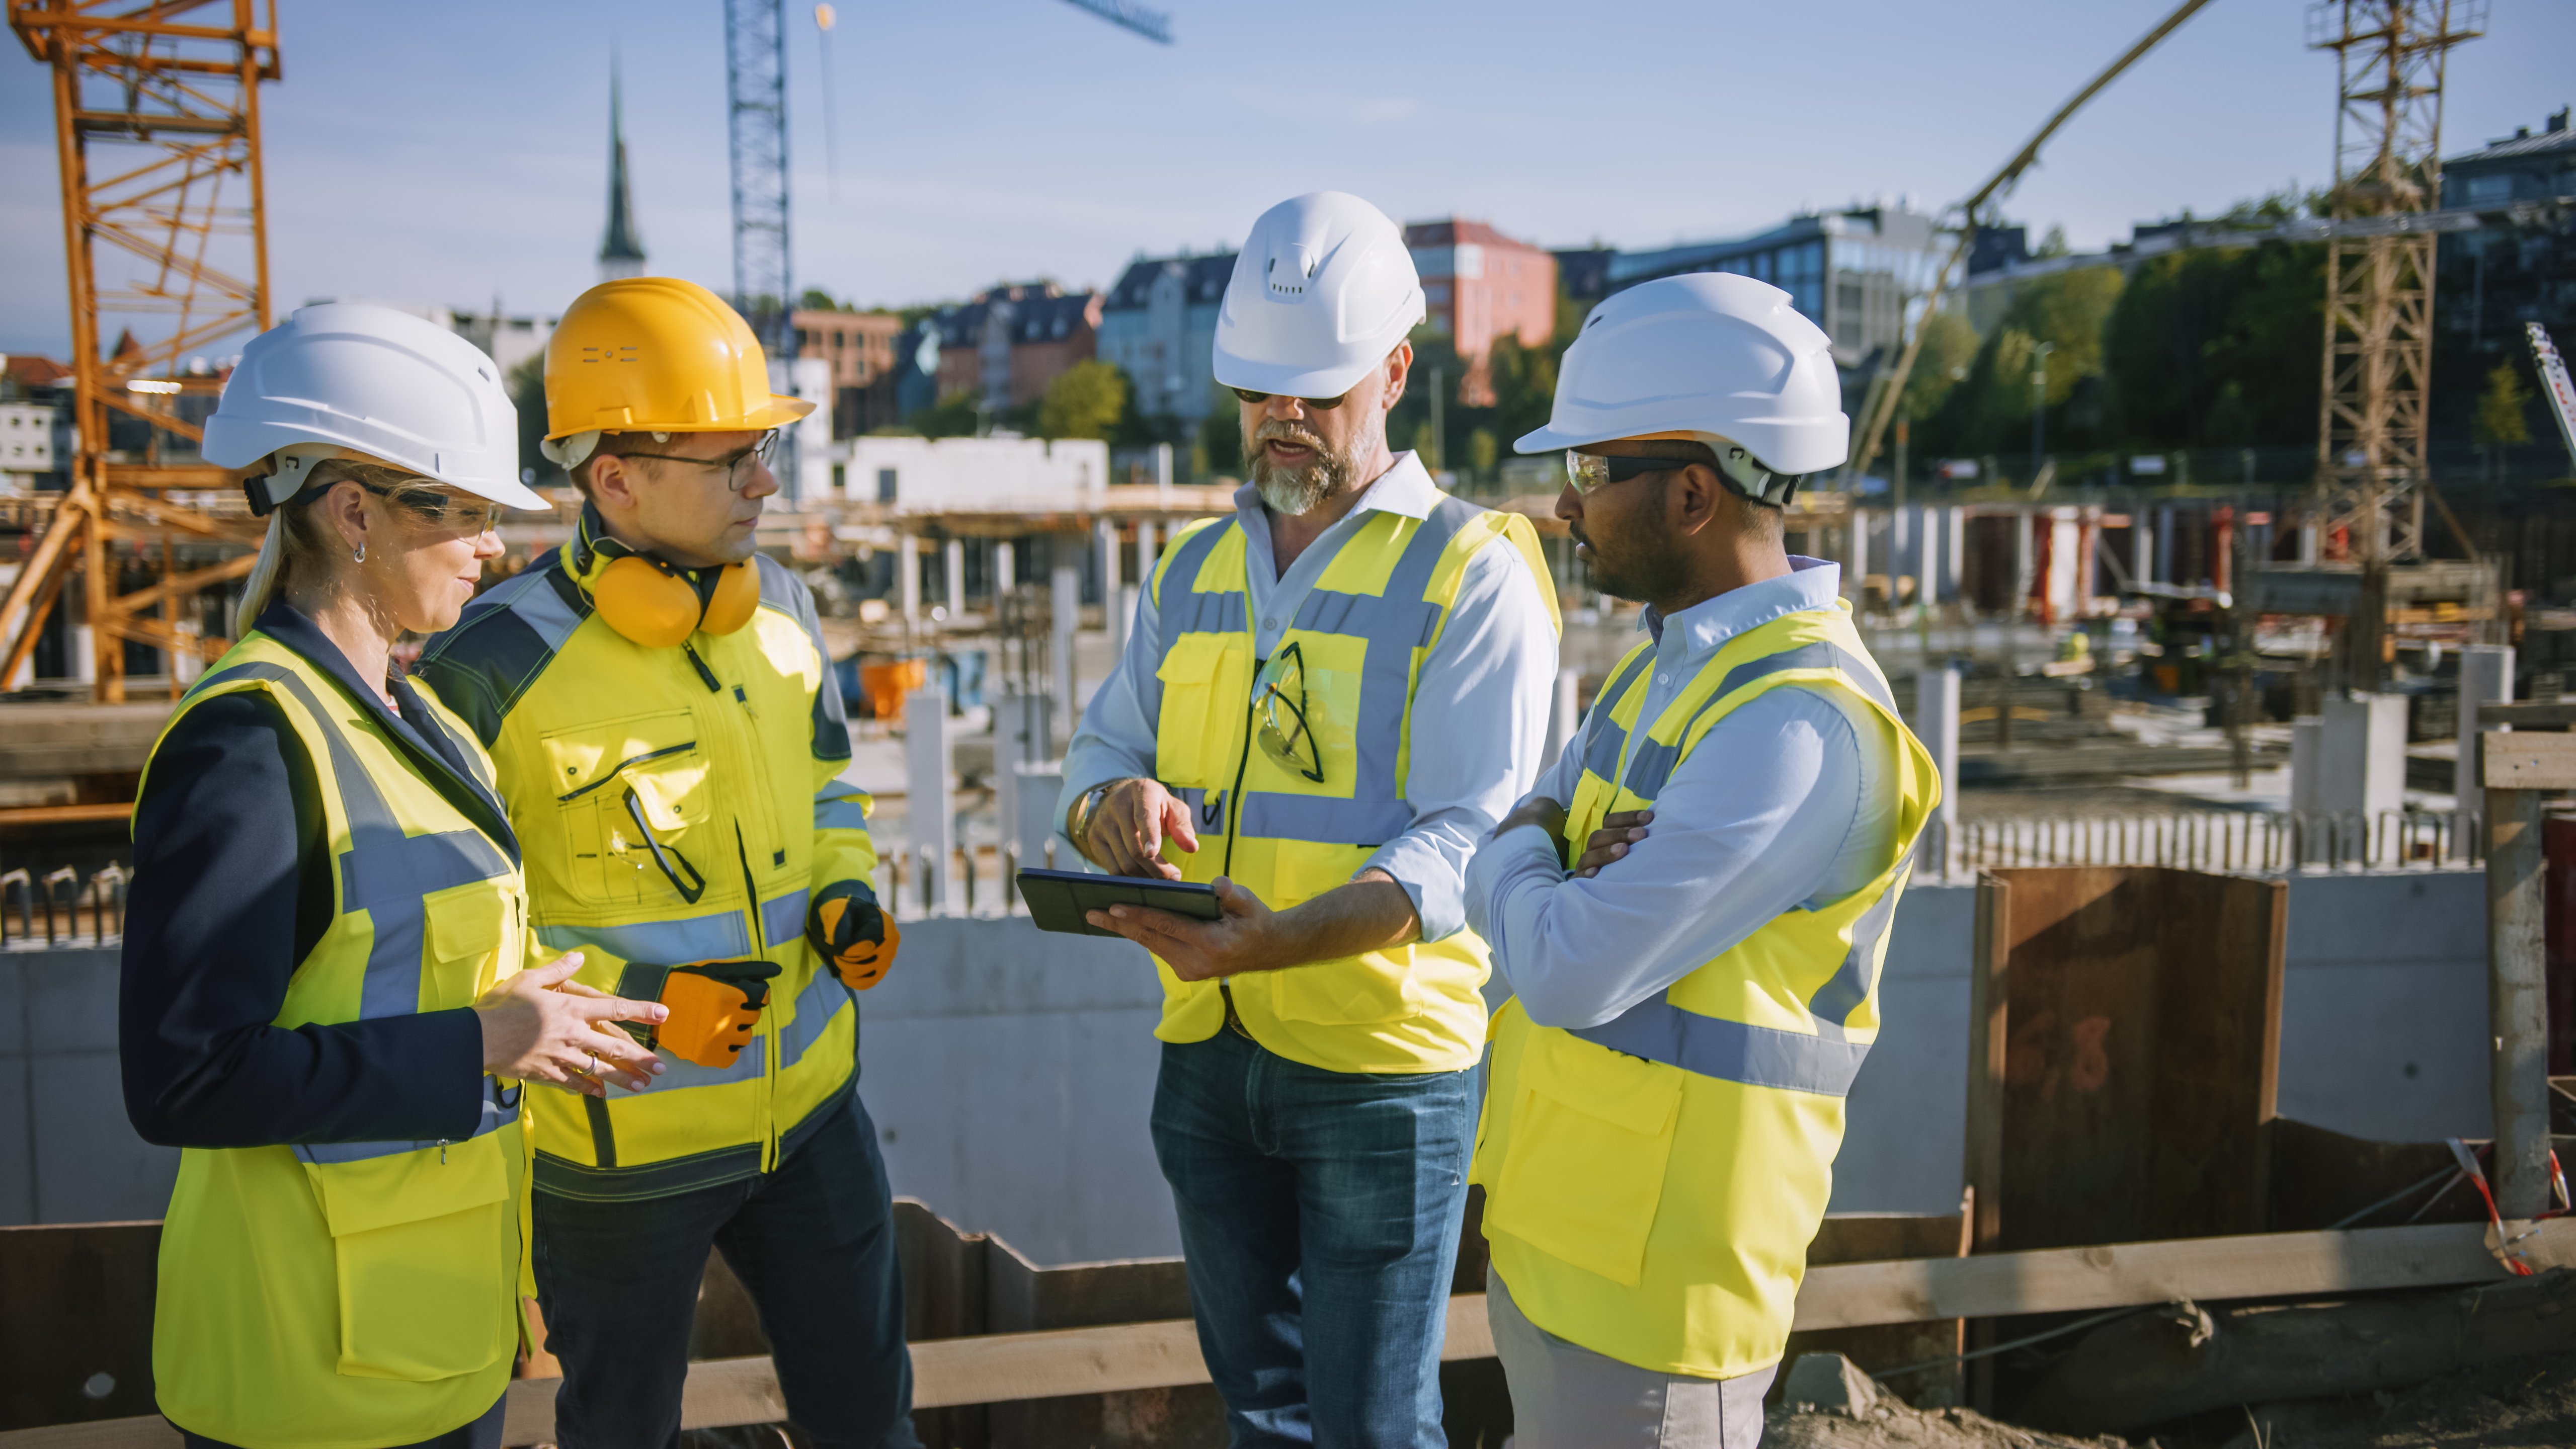 Four people on a construction site with one holding an iPad